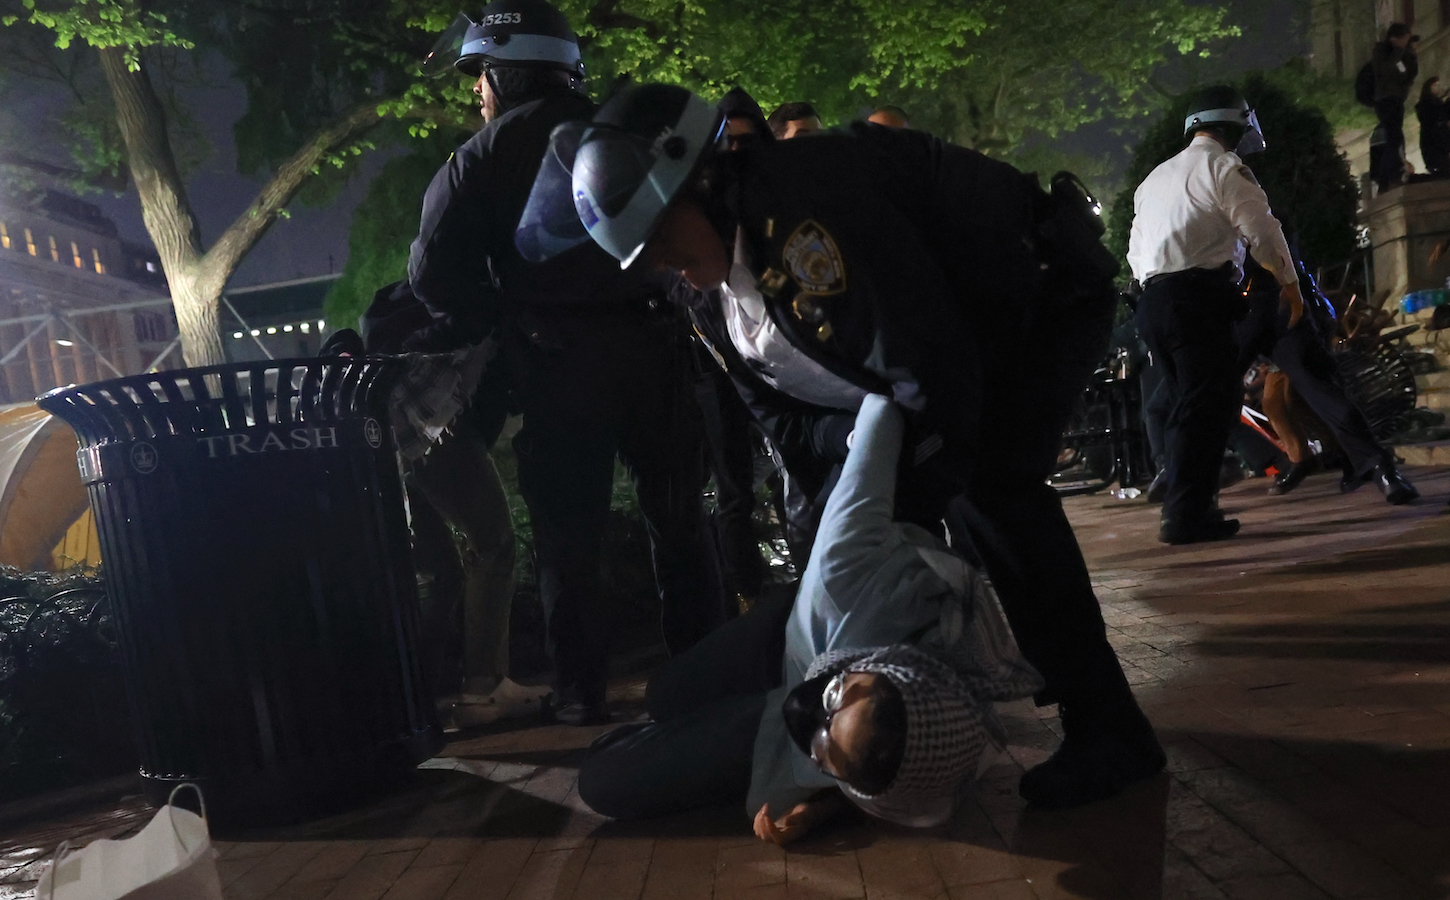 An NYPD officer in riot gear looms over a student protestor on the ground and appears to be gripping her arm.